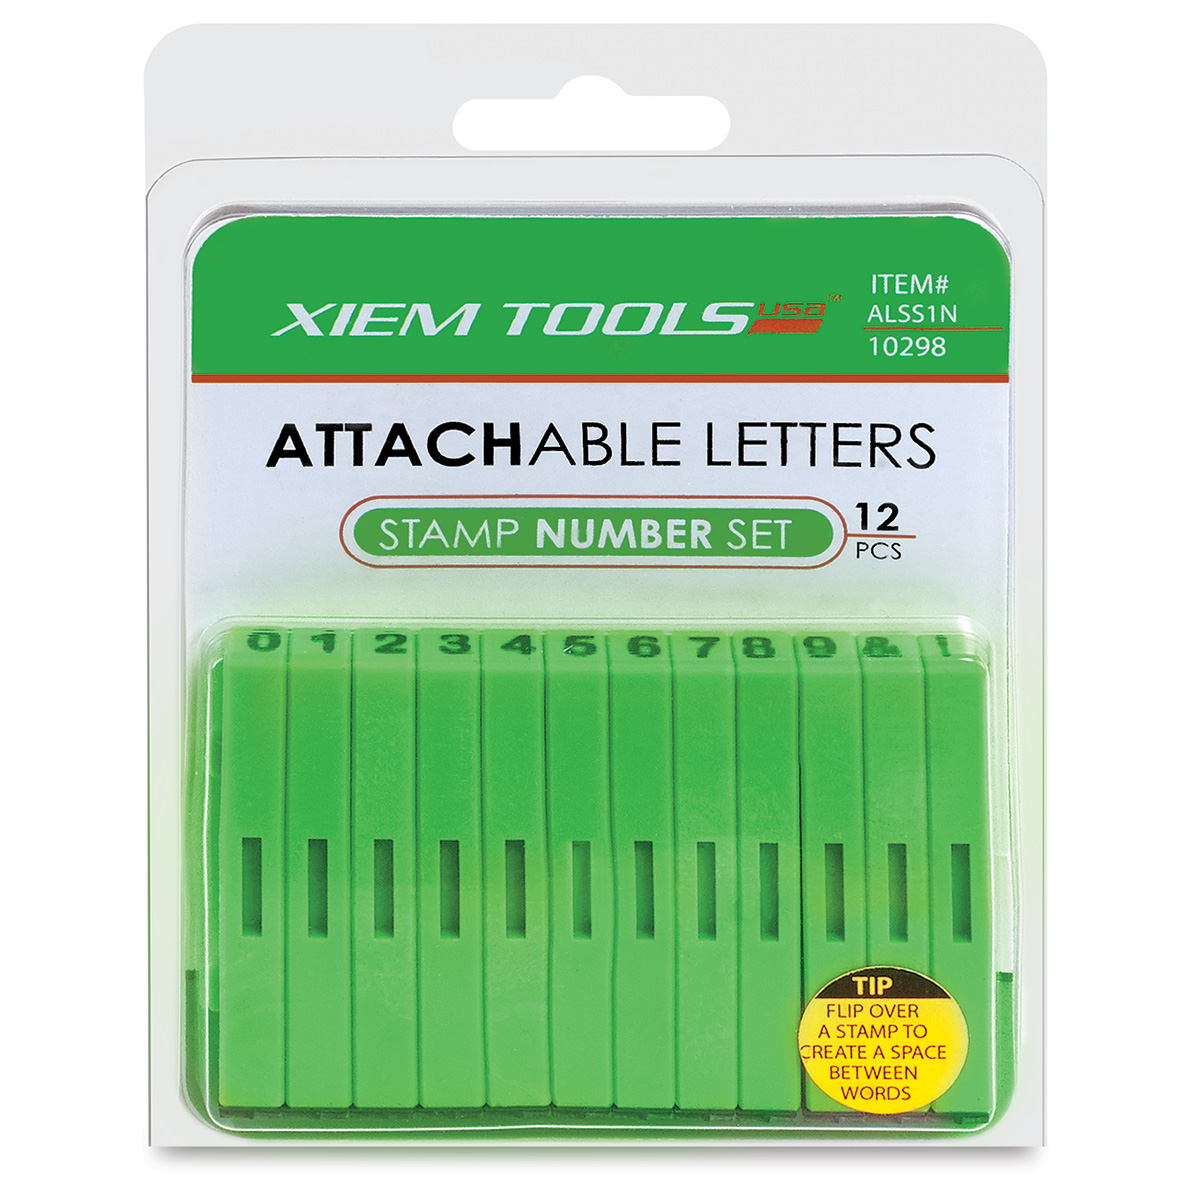 Extra Attachable Letter Stamp Set 12 pcs Lowercase - Ceramic, Clay, Pottery  Tools - Xiem Tools USA